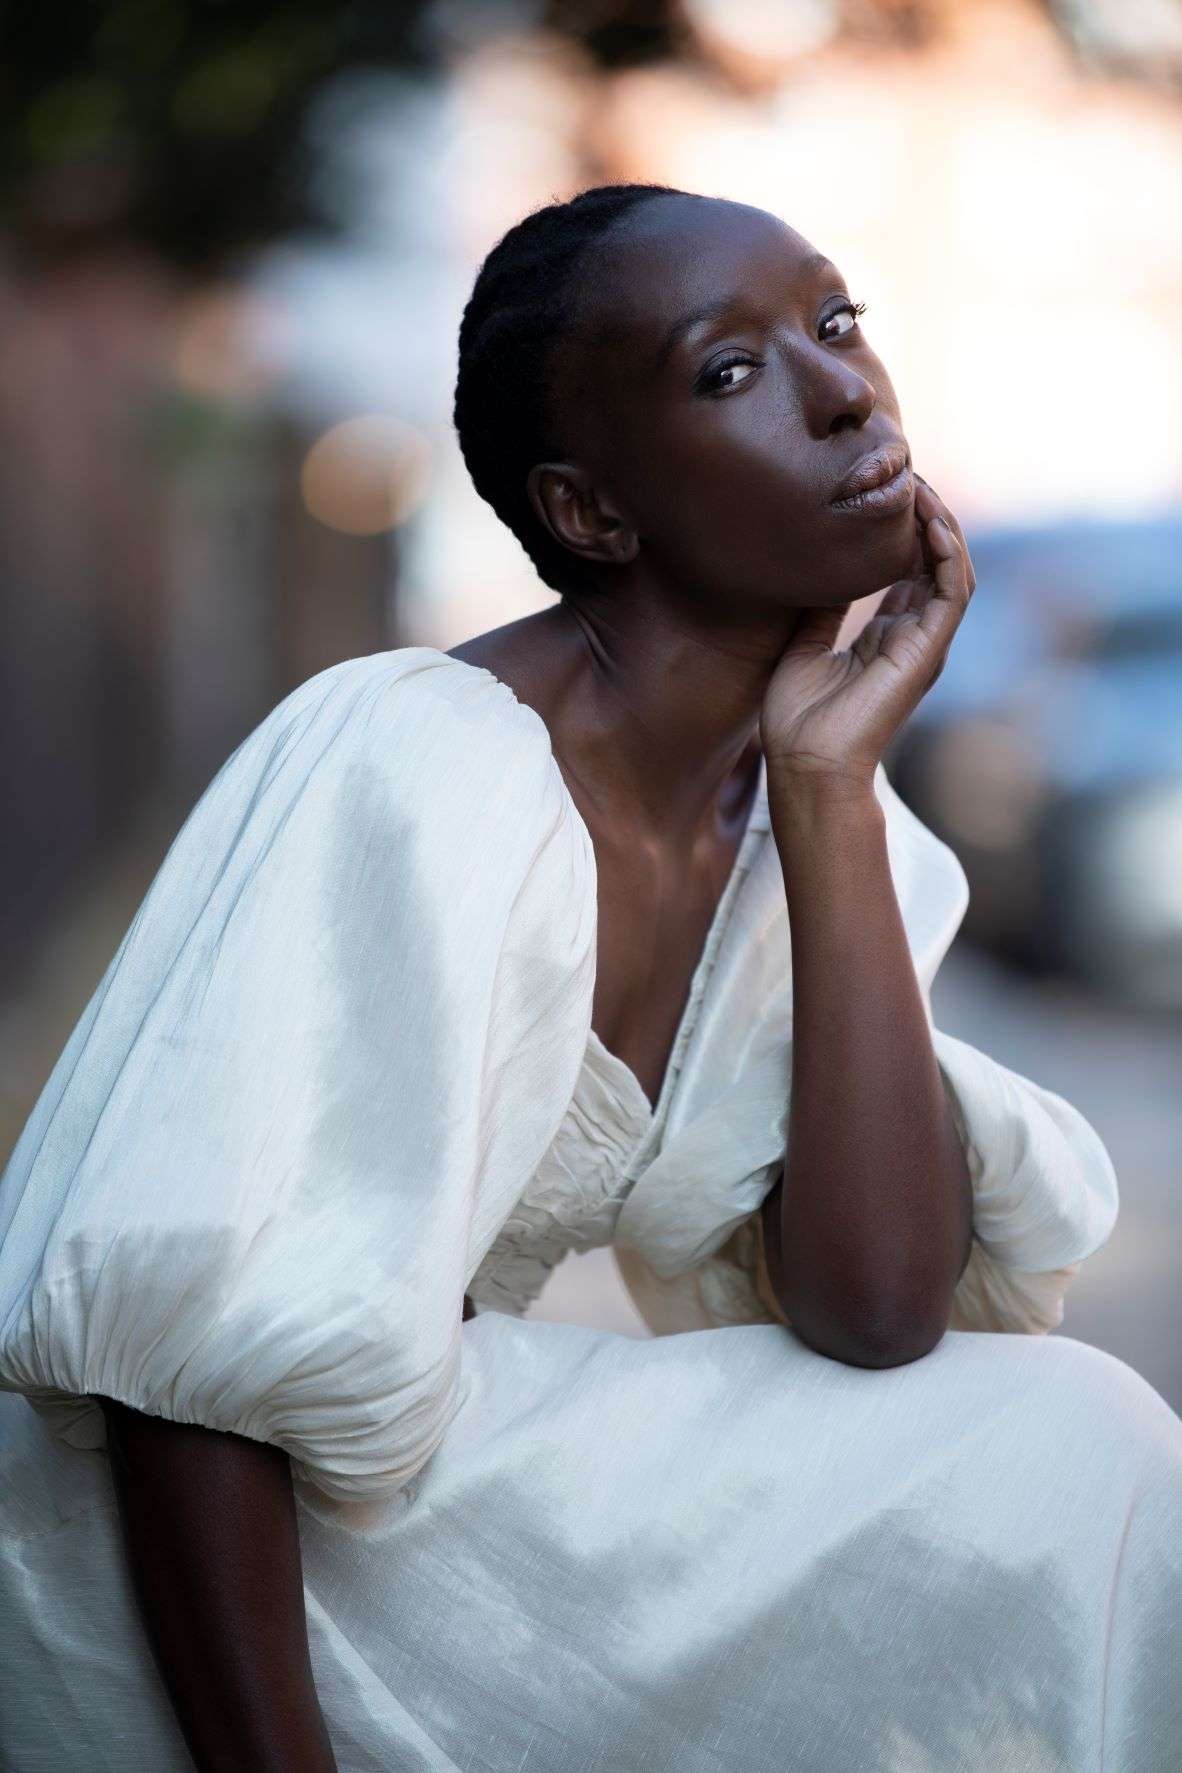 Portrait of Eunice Olumide, crouching down posing in a white dress 